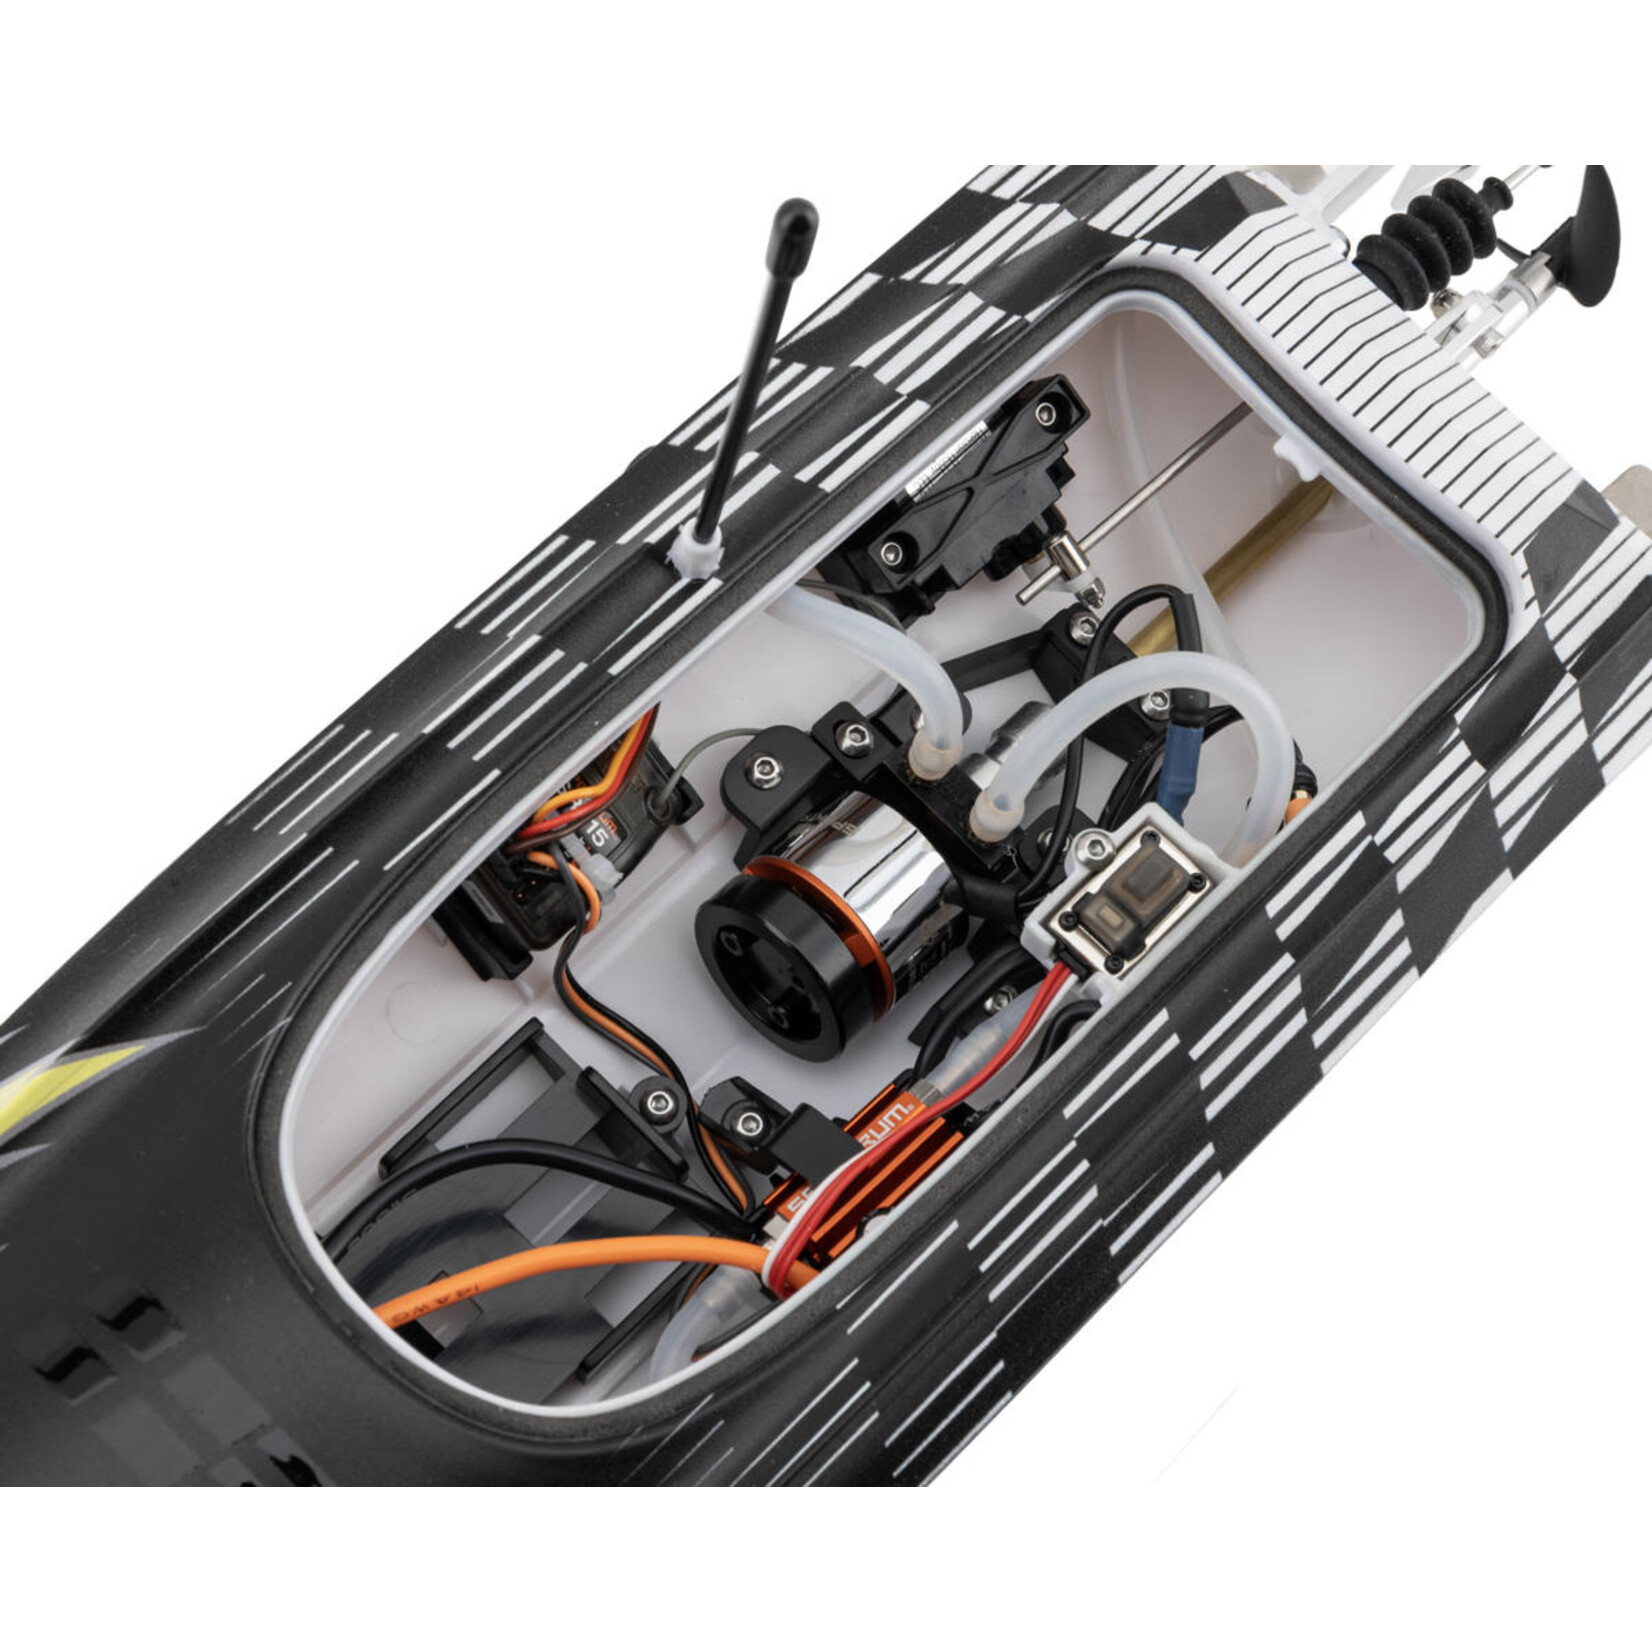 Pro Boat Pro Boat Recoil 2 18" Brushless Deep-V Self-Righting RTR Boat (Heatwave) w/2.4GHz Radio #PRB08053T2